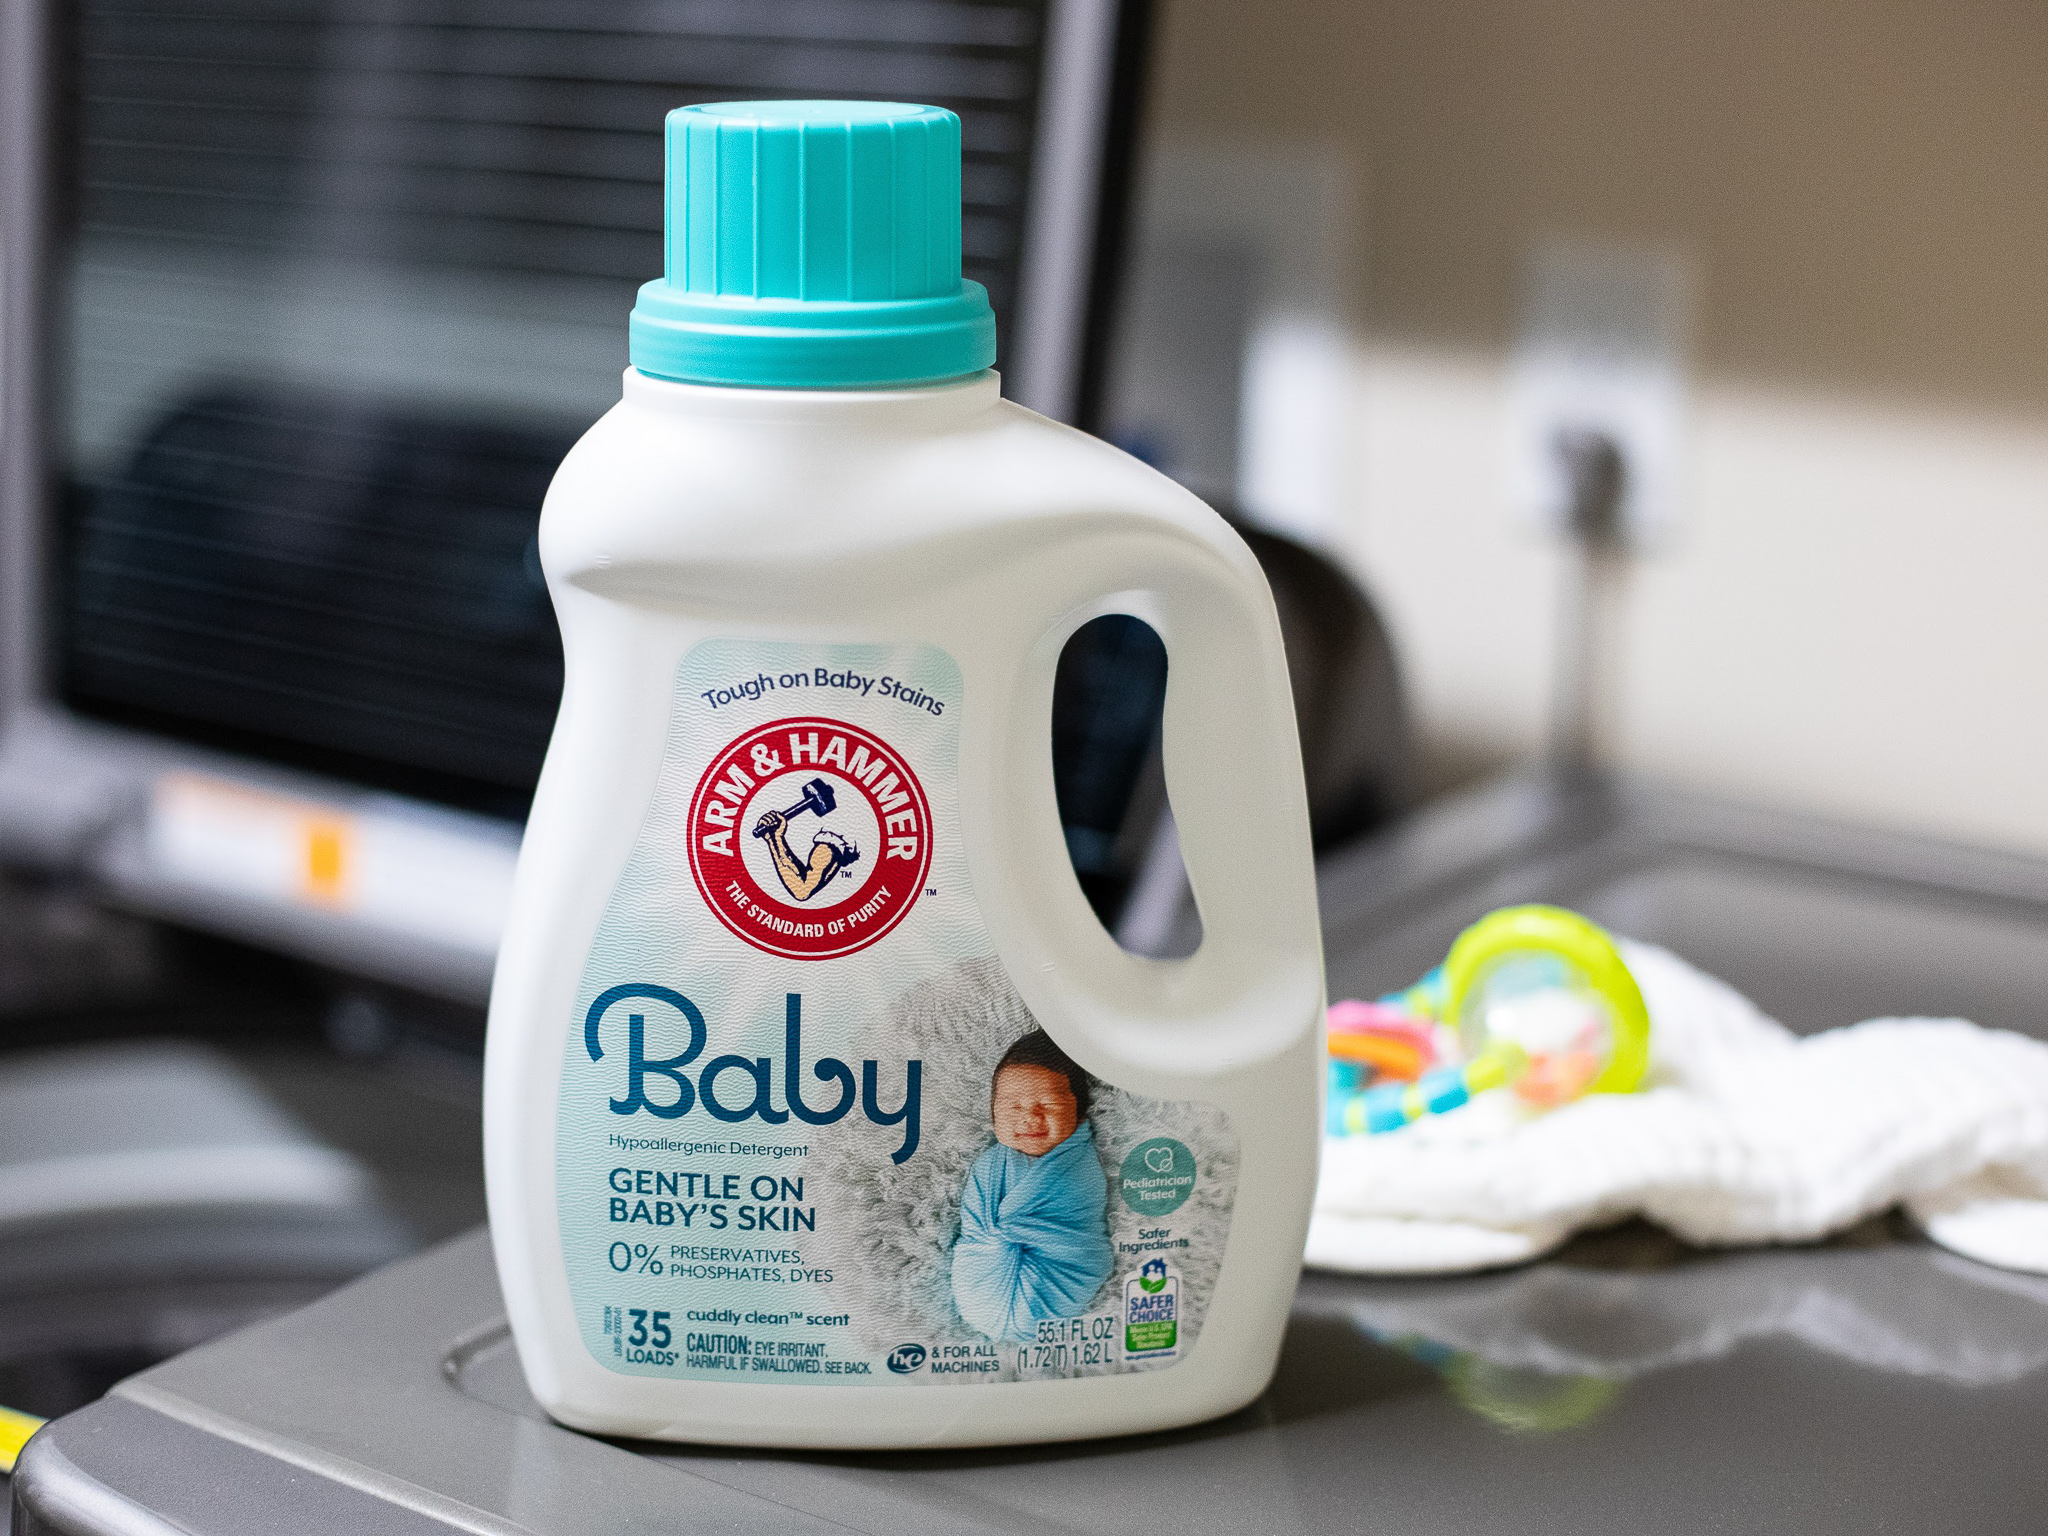 Grab Arm & Hammer Baby Detergent As Low As $2.35 At Publix